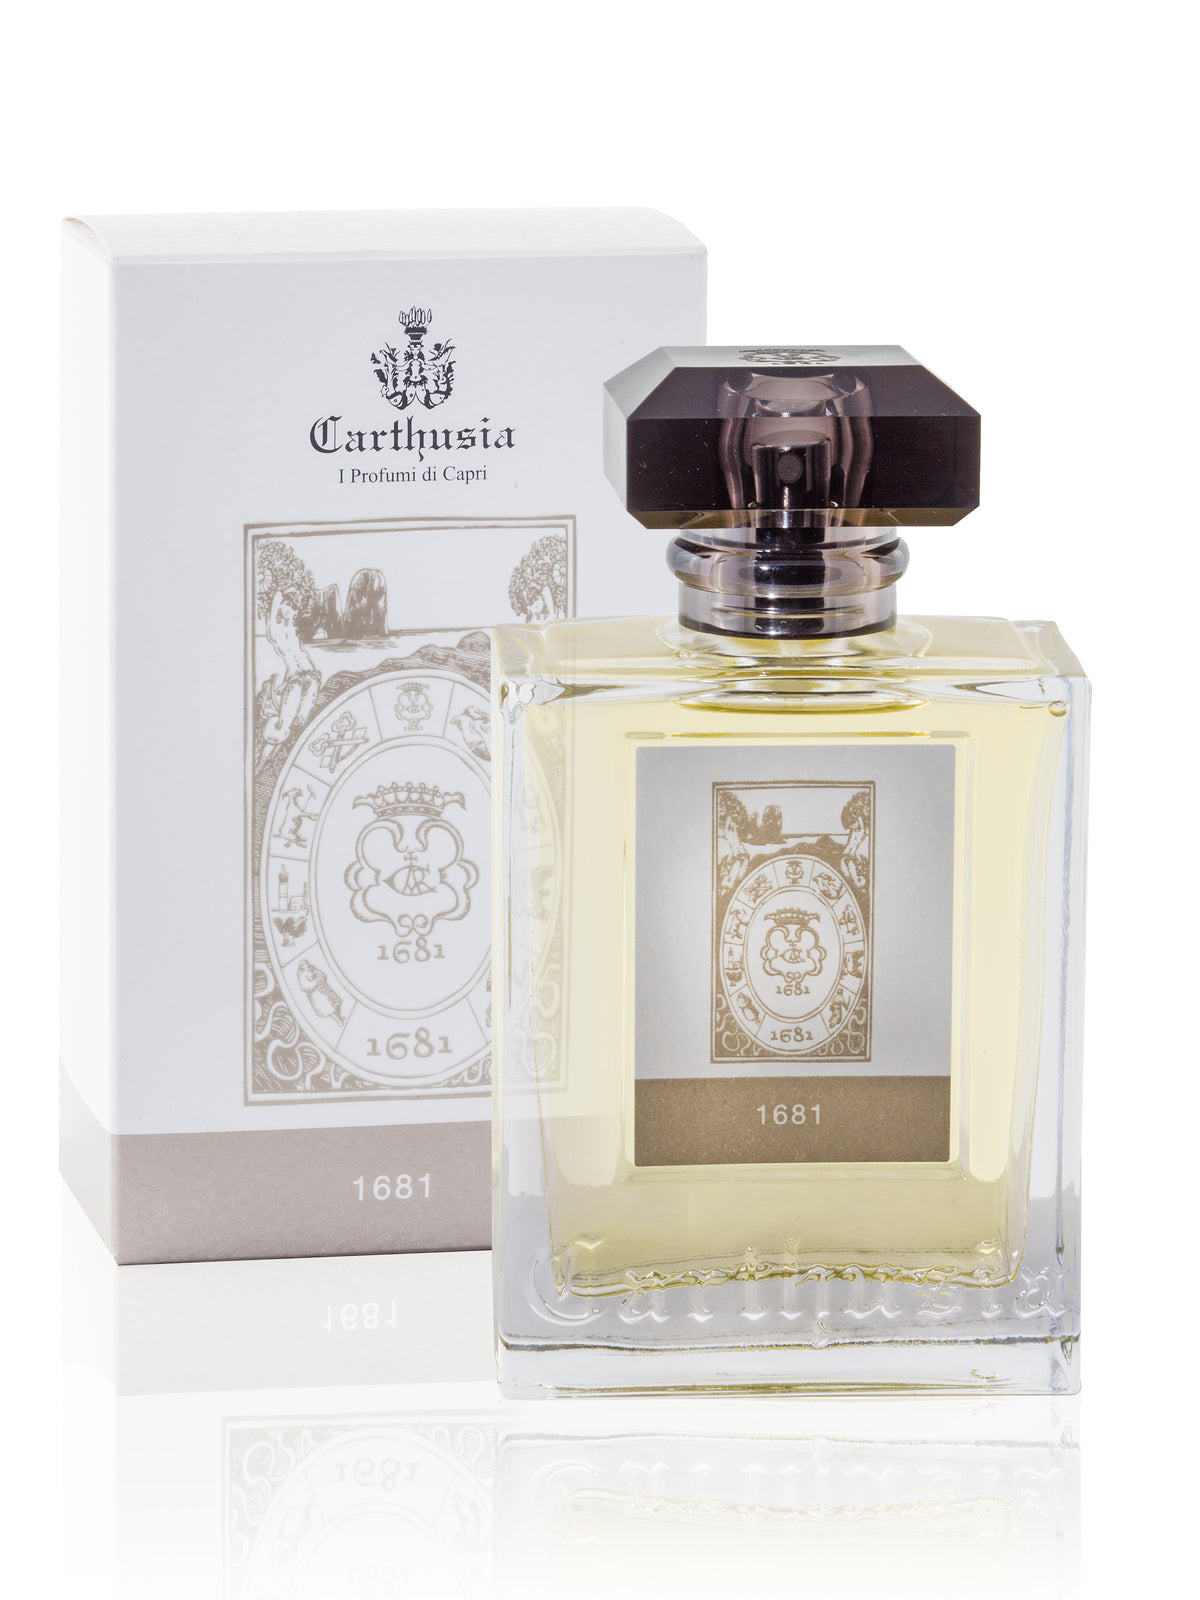 A bottle of Carthusia I Profumi de Capri 1681 Eau de Parfum - 100ml with a transparent glass design and a dark brown cap, next to its white packaging featuring an elegant logo. The perfume appears yellow in color.